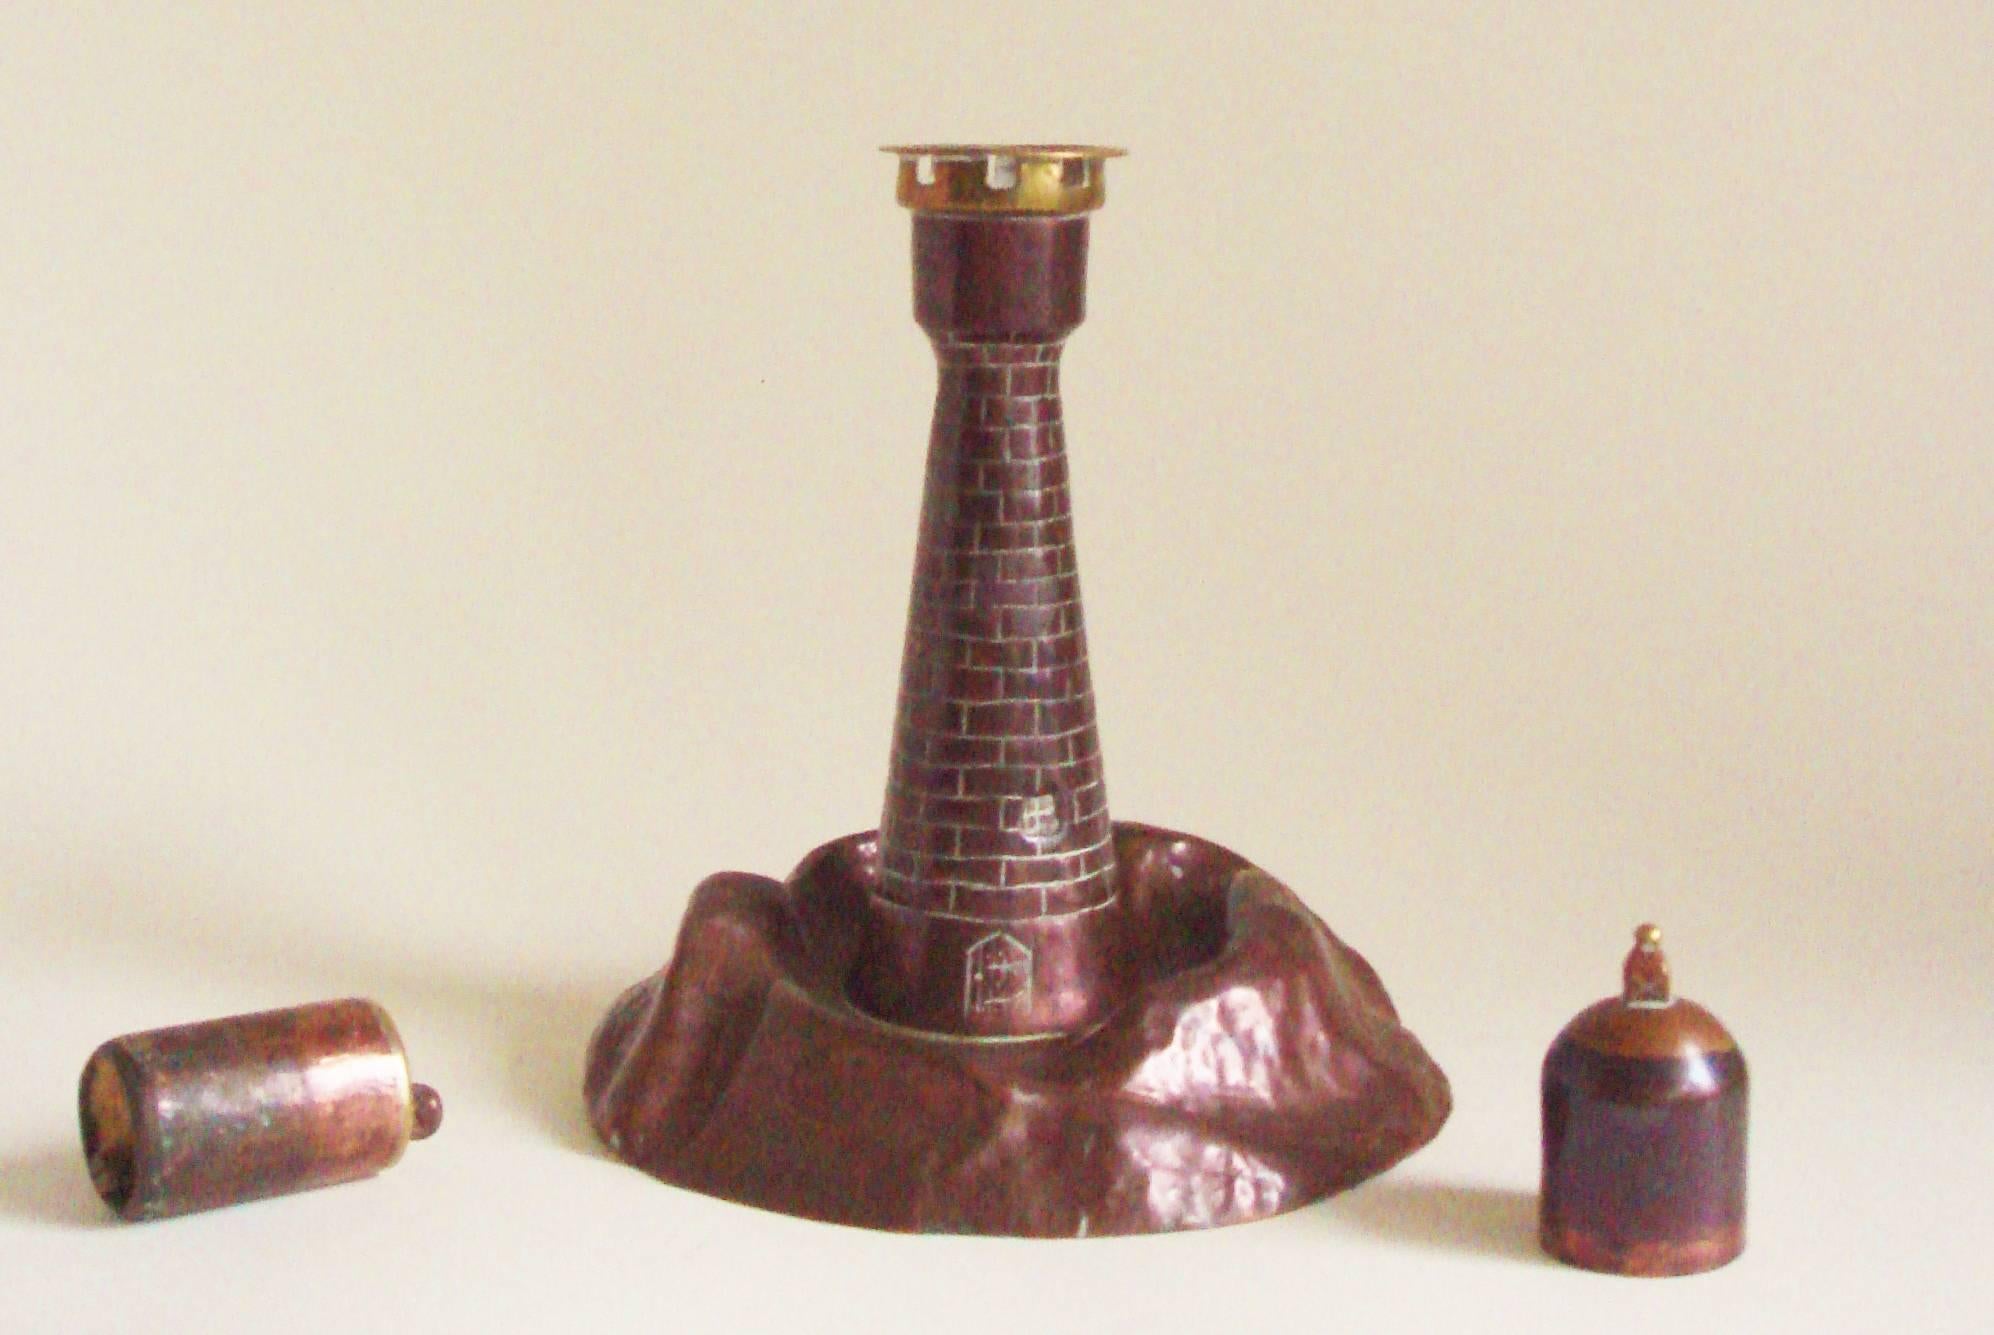 Folk Art English Trench Art Brass and Copper Lighthouse Wheel and Flint Table Lighter